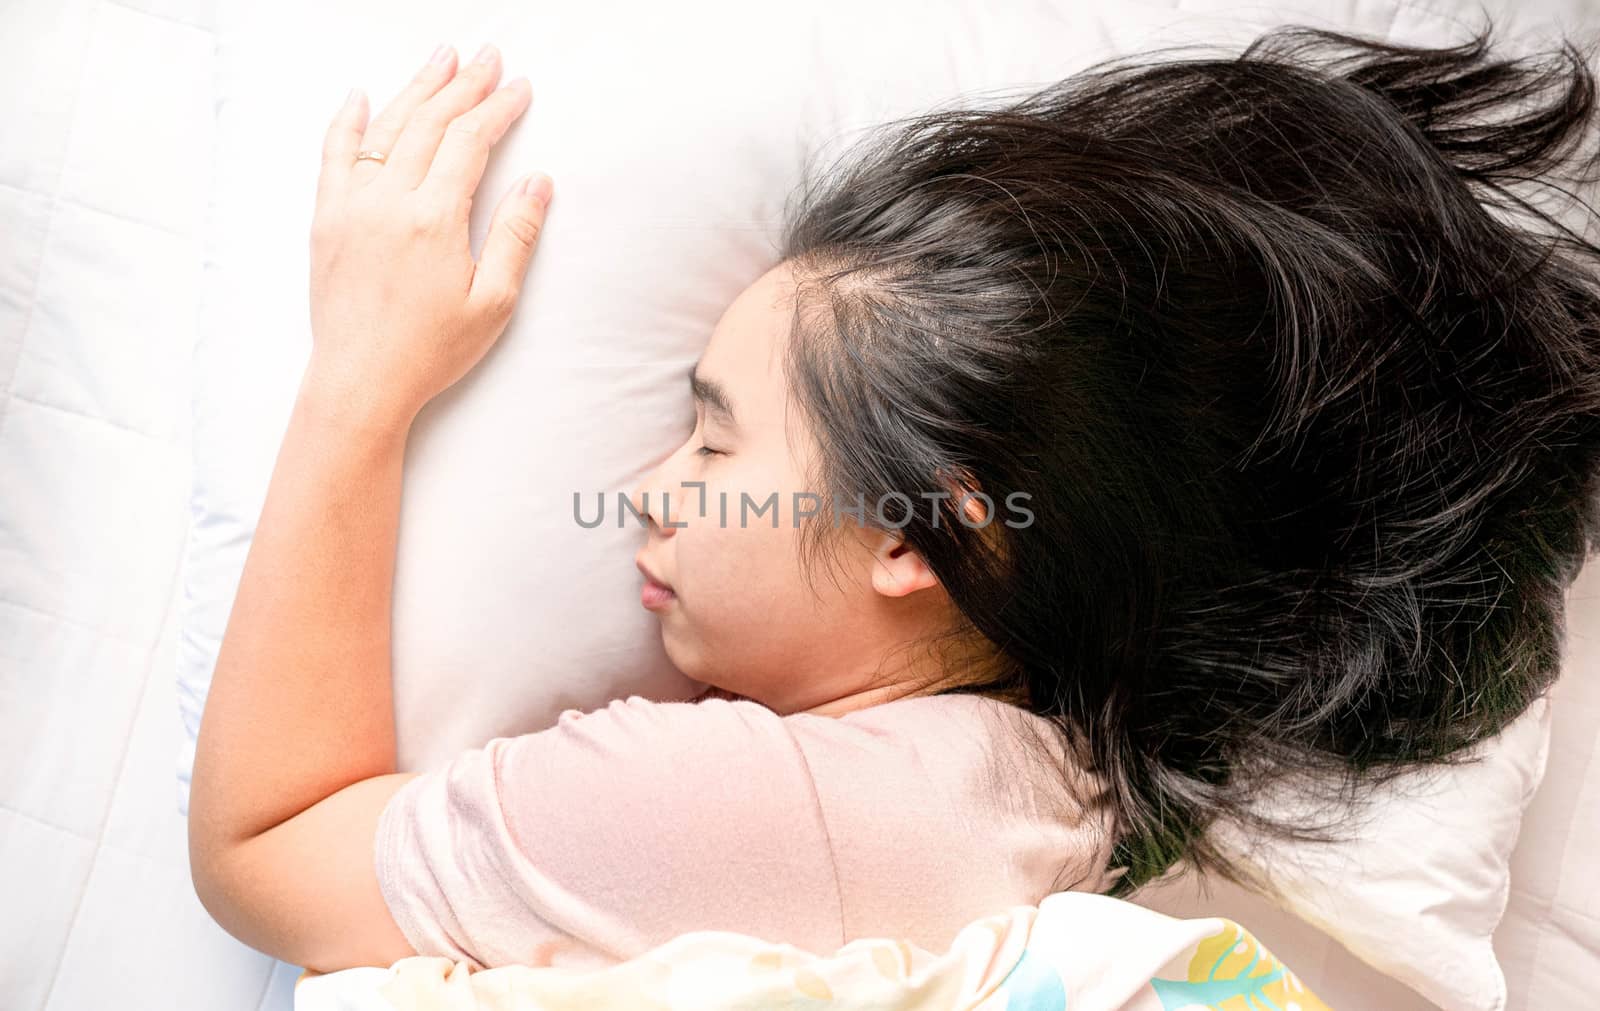 Top view of attractive Asian young woman sleeping well in bed hugging soft white pillow. Health care concept.